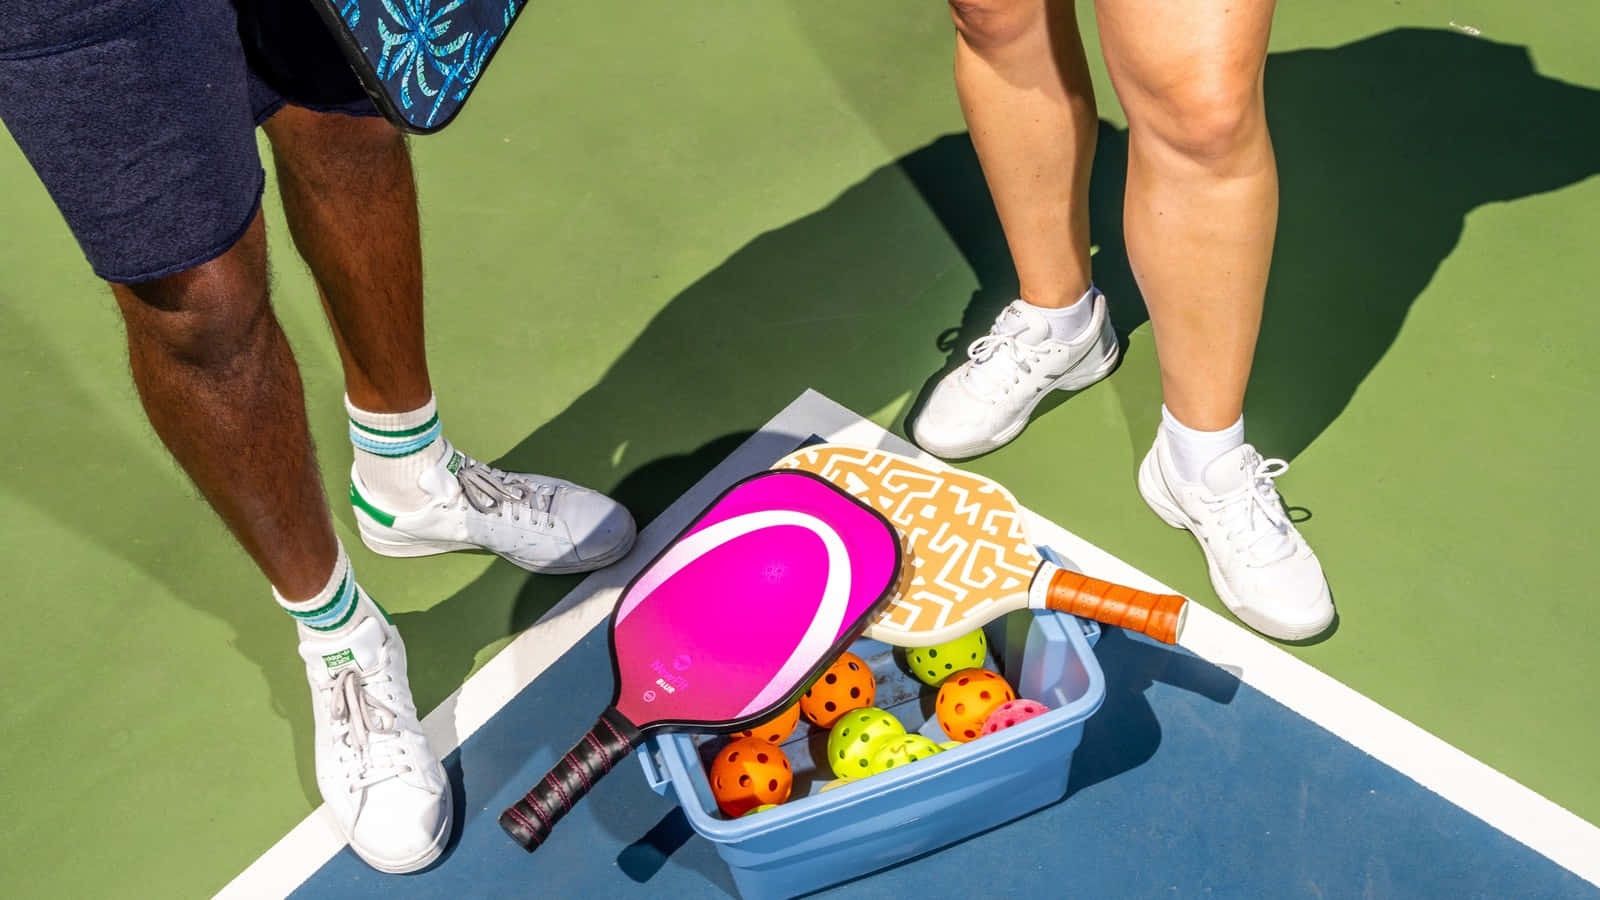 "Unleash Your Inner Champion - Pick Up Pickleball Today!"